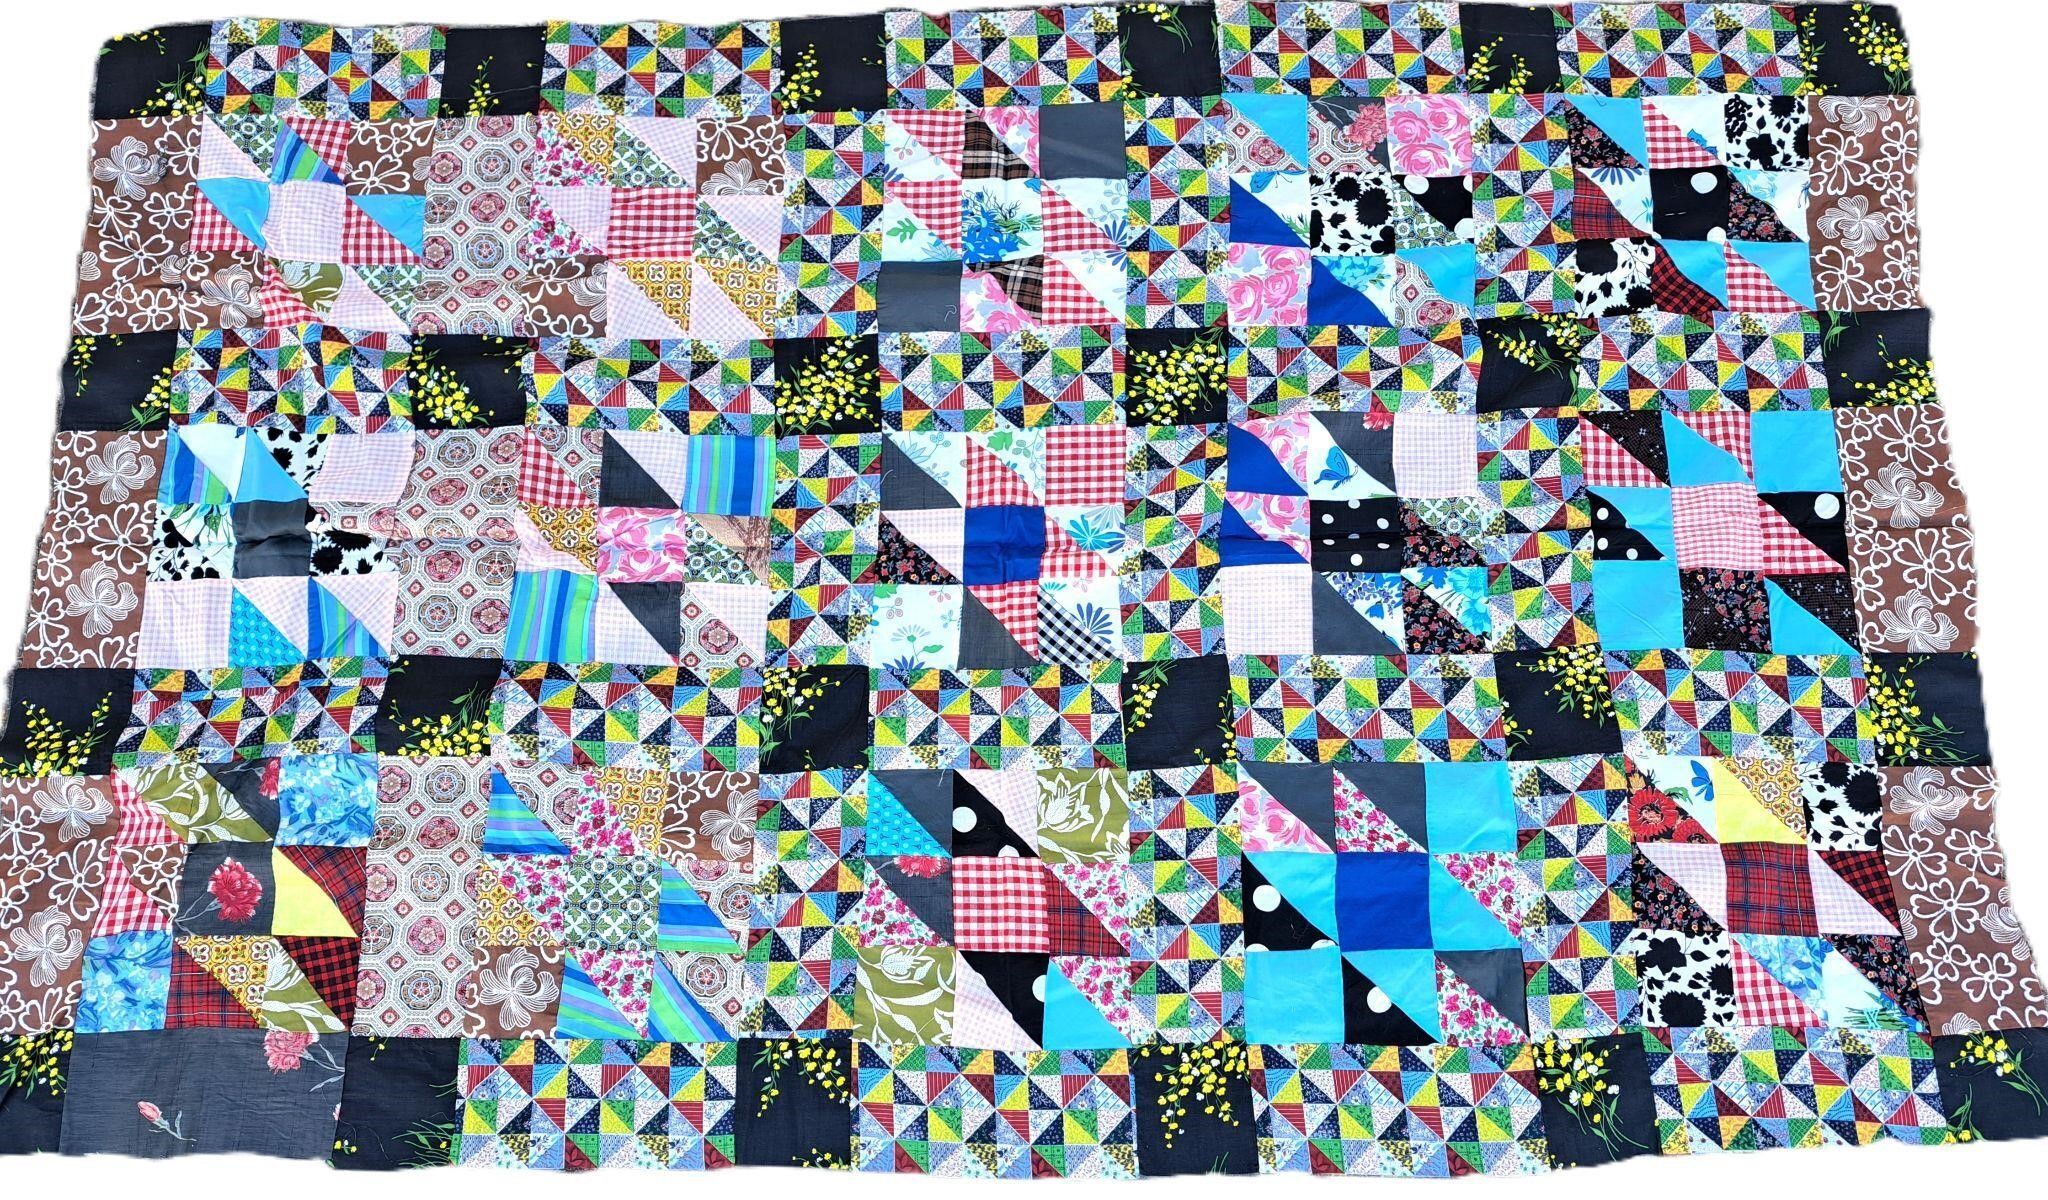 VINTAGE HAND SEWN COLORFUL QUILT TOPPER 79" X 49"